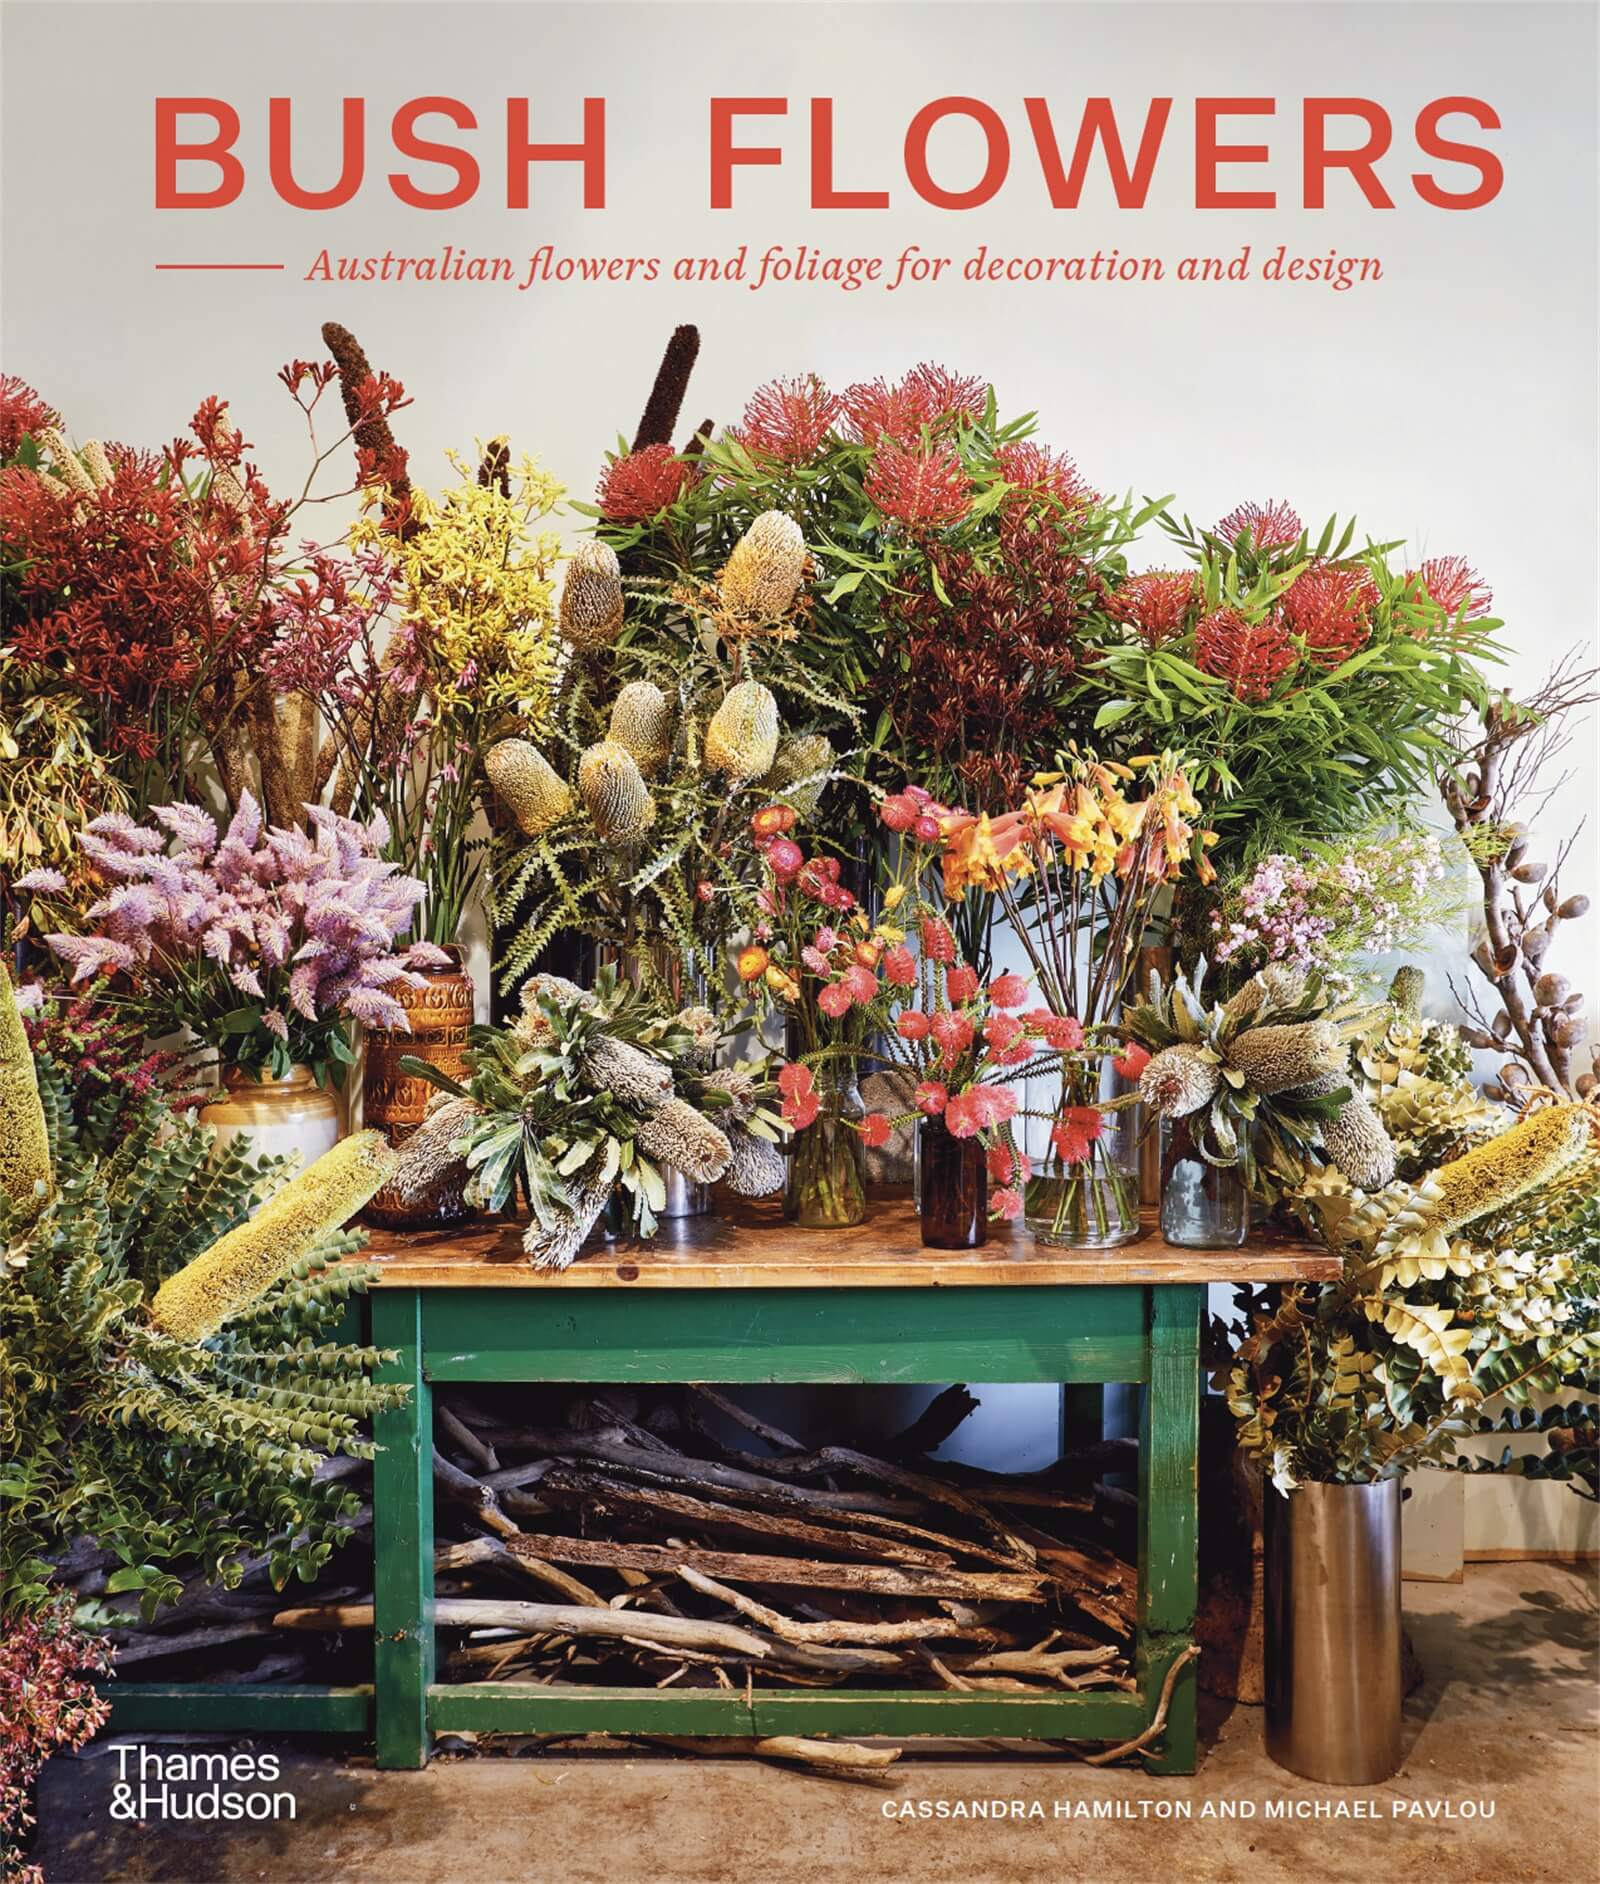 Cover image of Bush Flowers, showing a large array of native australian flowers on green table. Title of Bush Flowers printed in orange, sans serif font, top centre